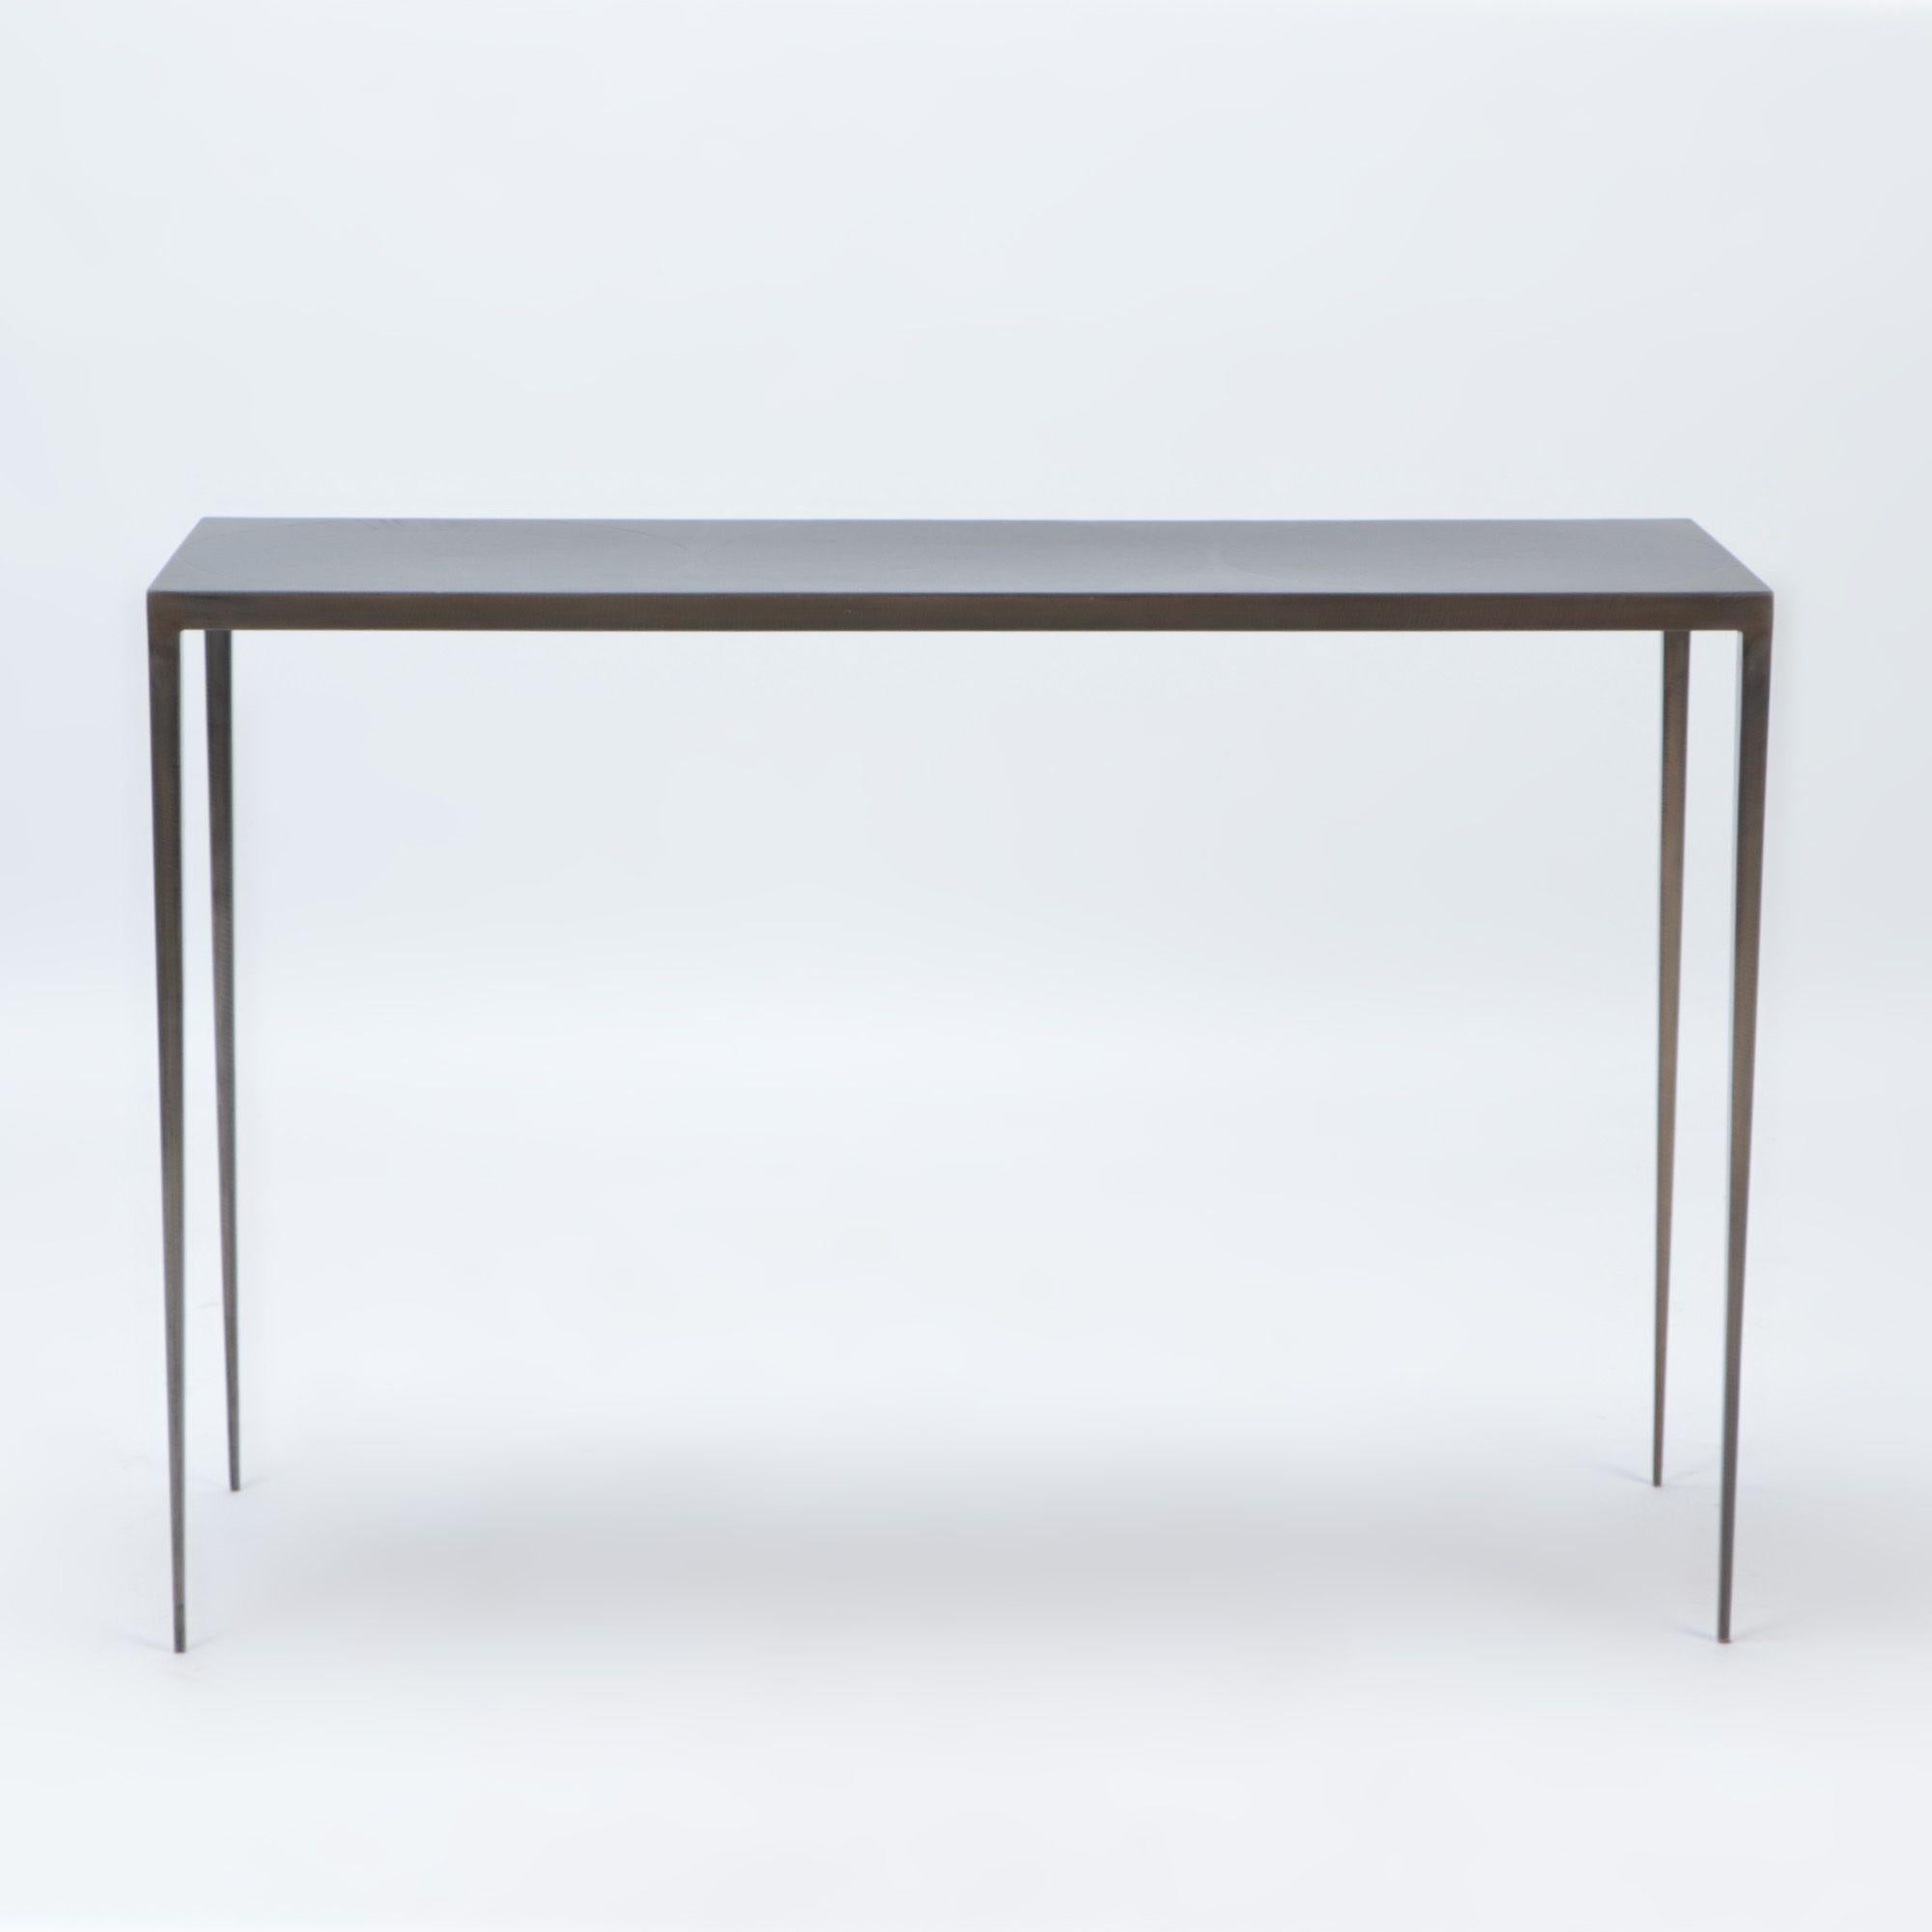 A wrought iron console with bronze wash top in the manner of Jean-Michel Frank. Contemporary.